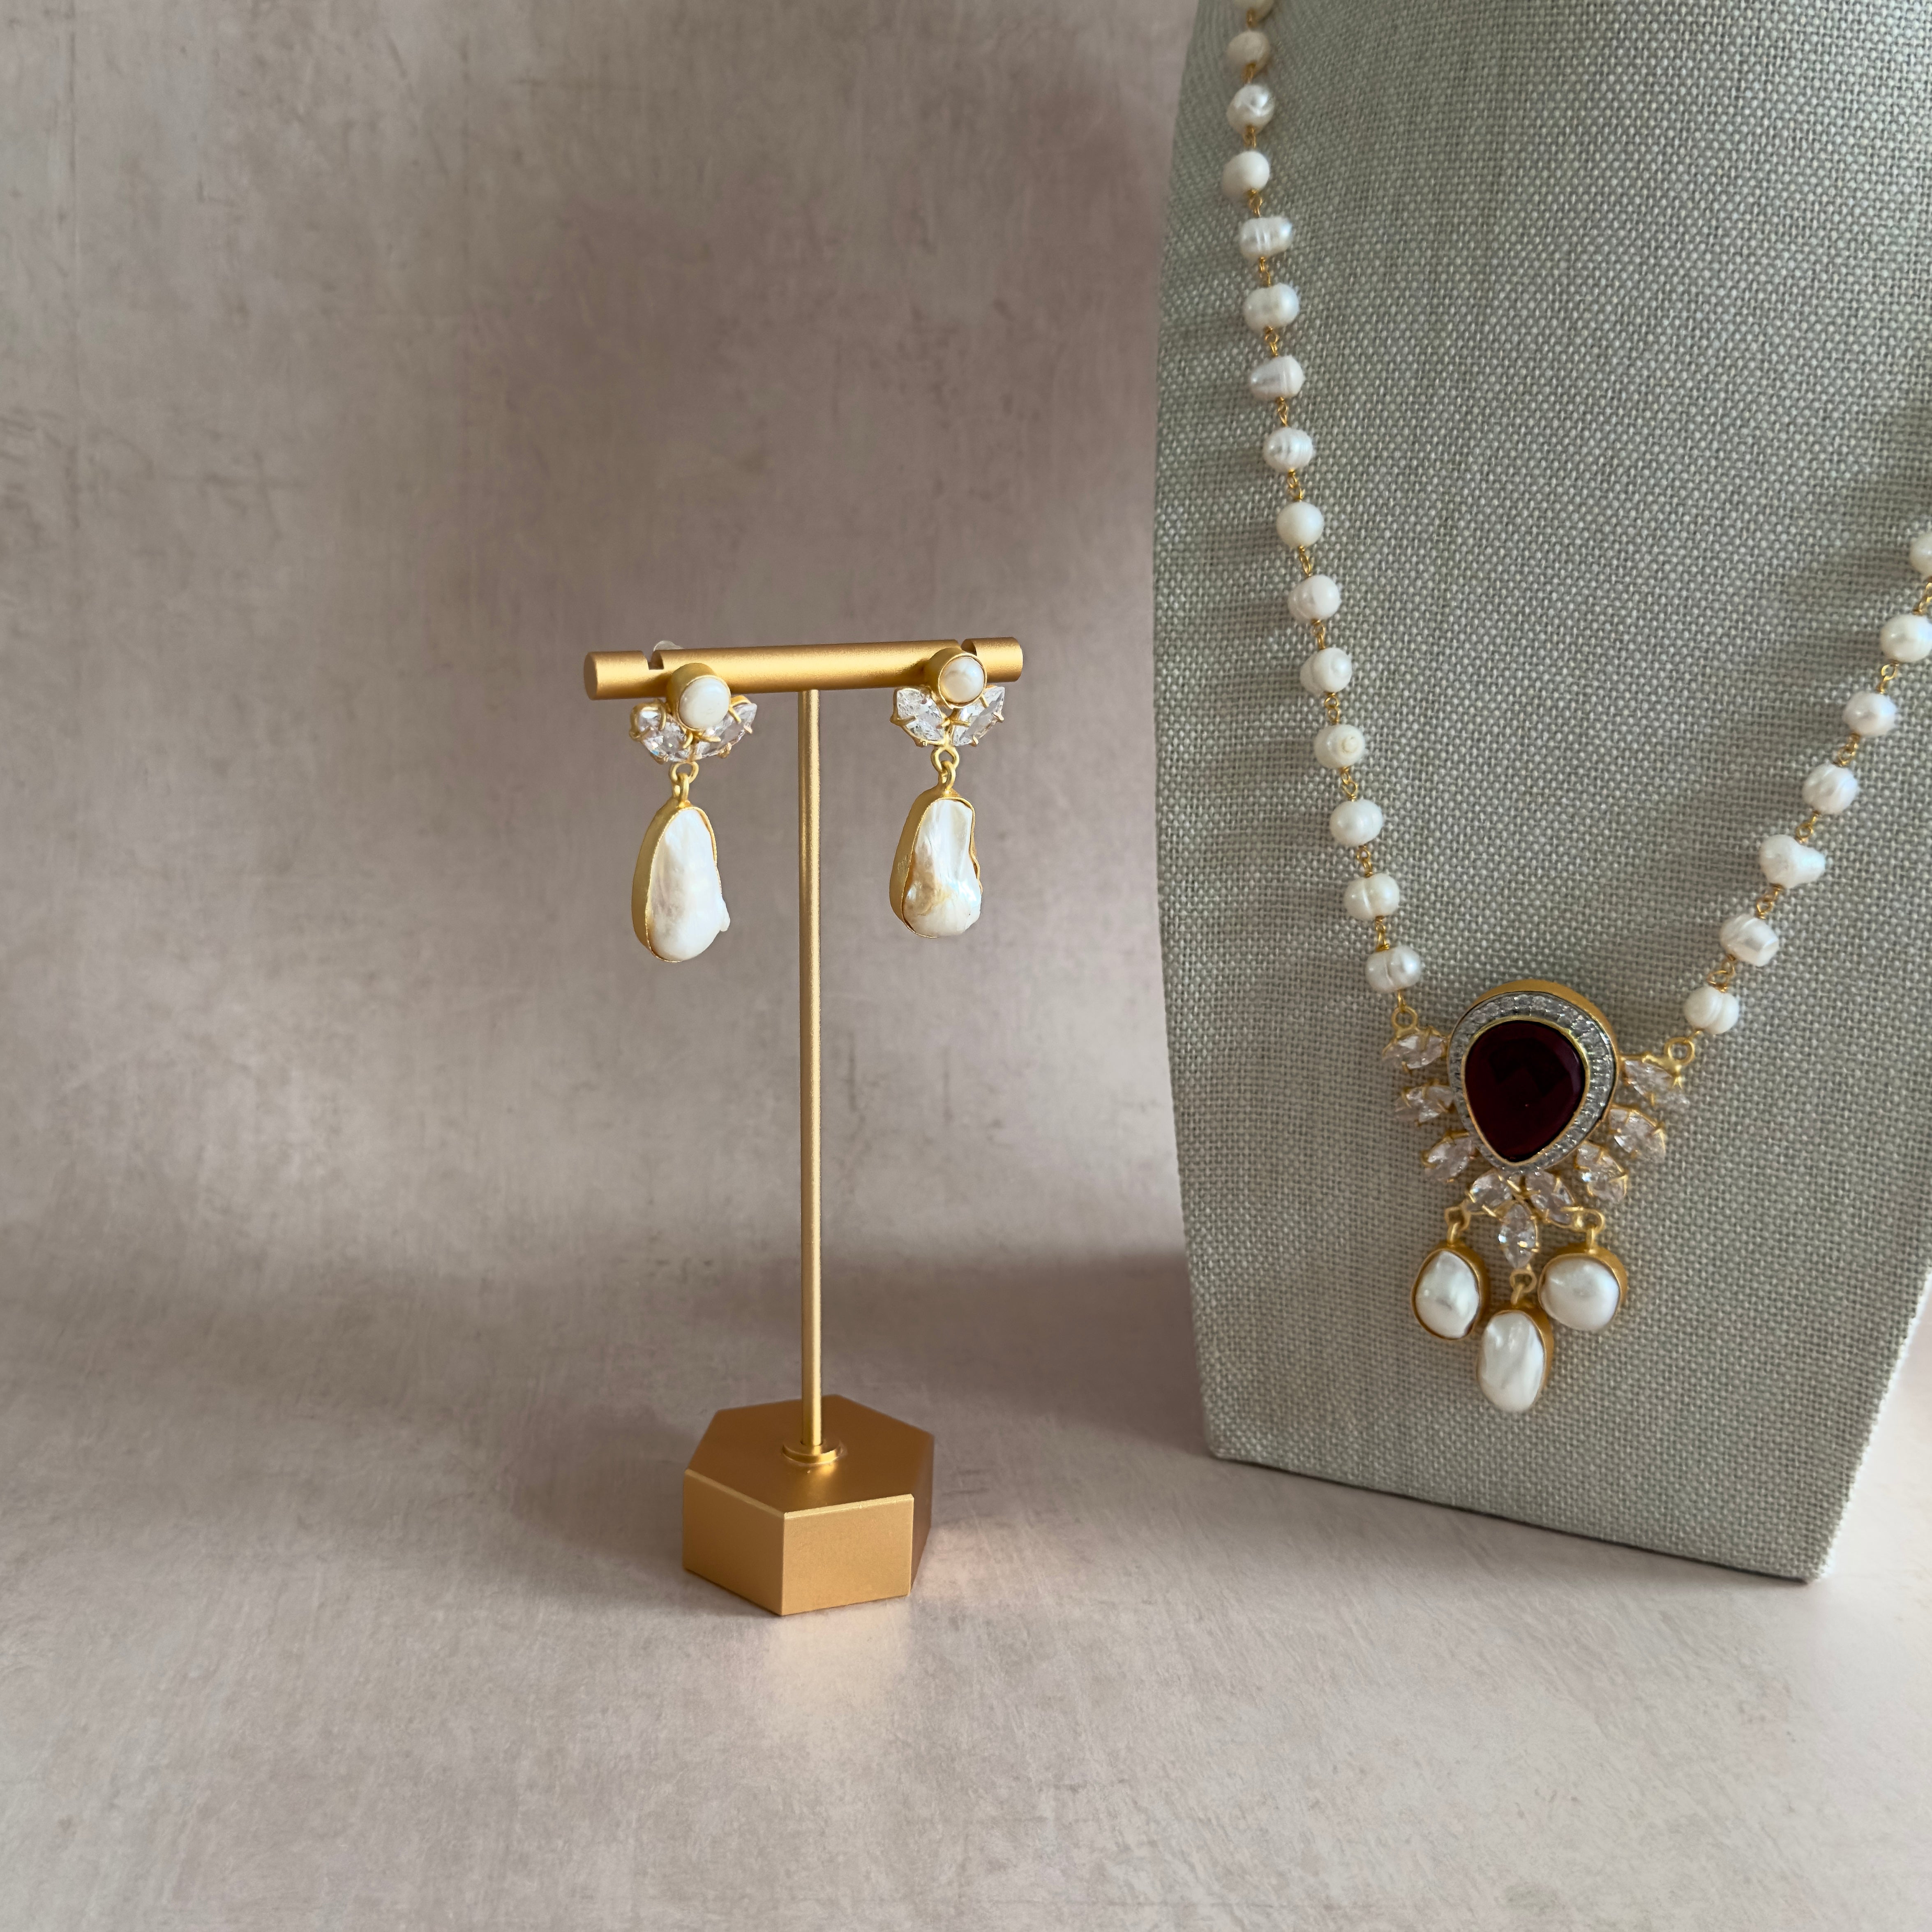 This elegant Mala Set features a stunning combination of ruby stones and freshwater pearls, accented with crystal zirconias. The set also includes a pair of baroque pearl and crystal earrings. Enhance your beauty and energy with this glamorous accessory.